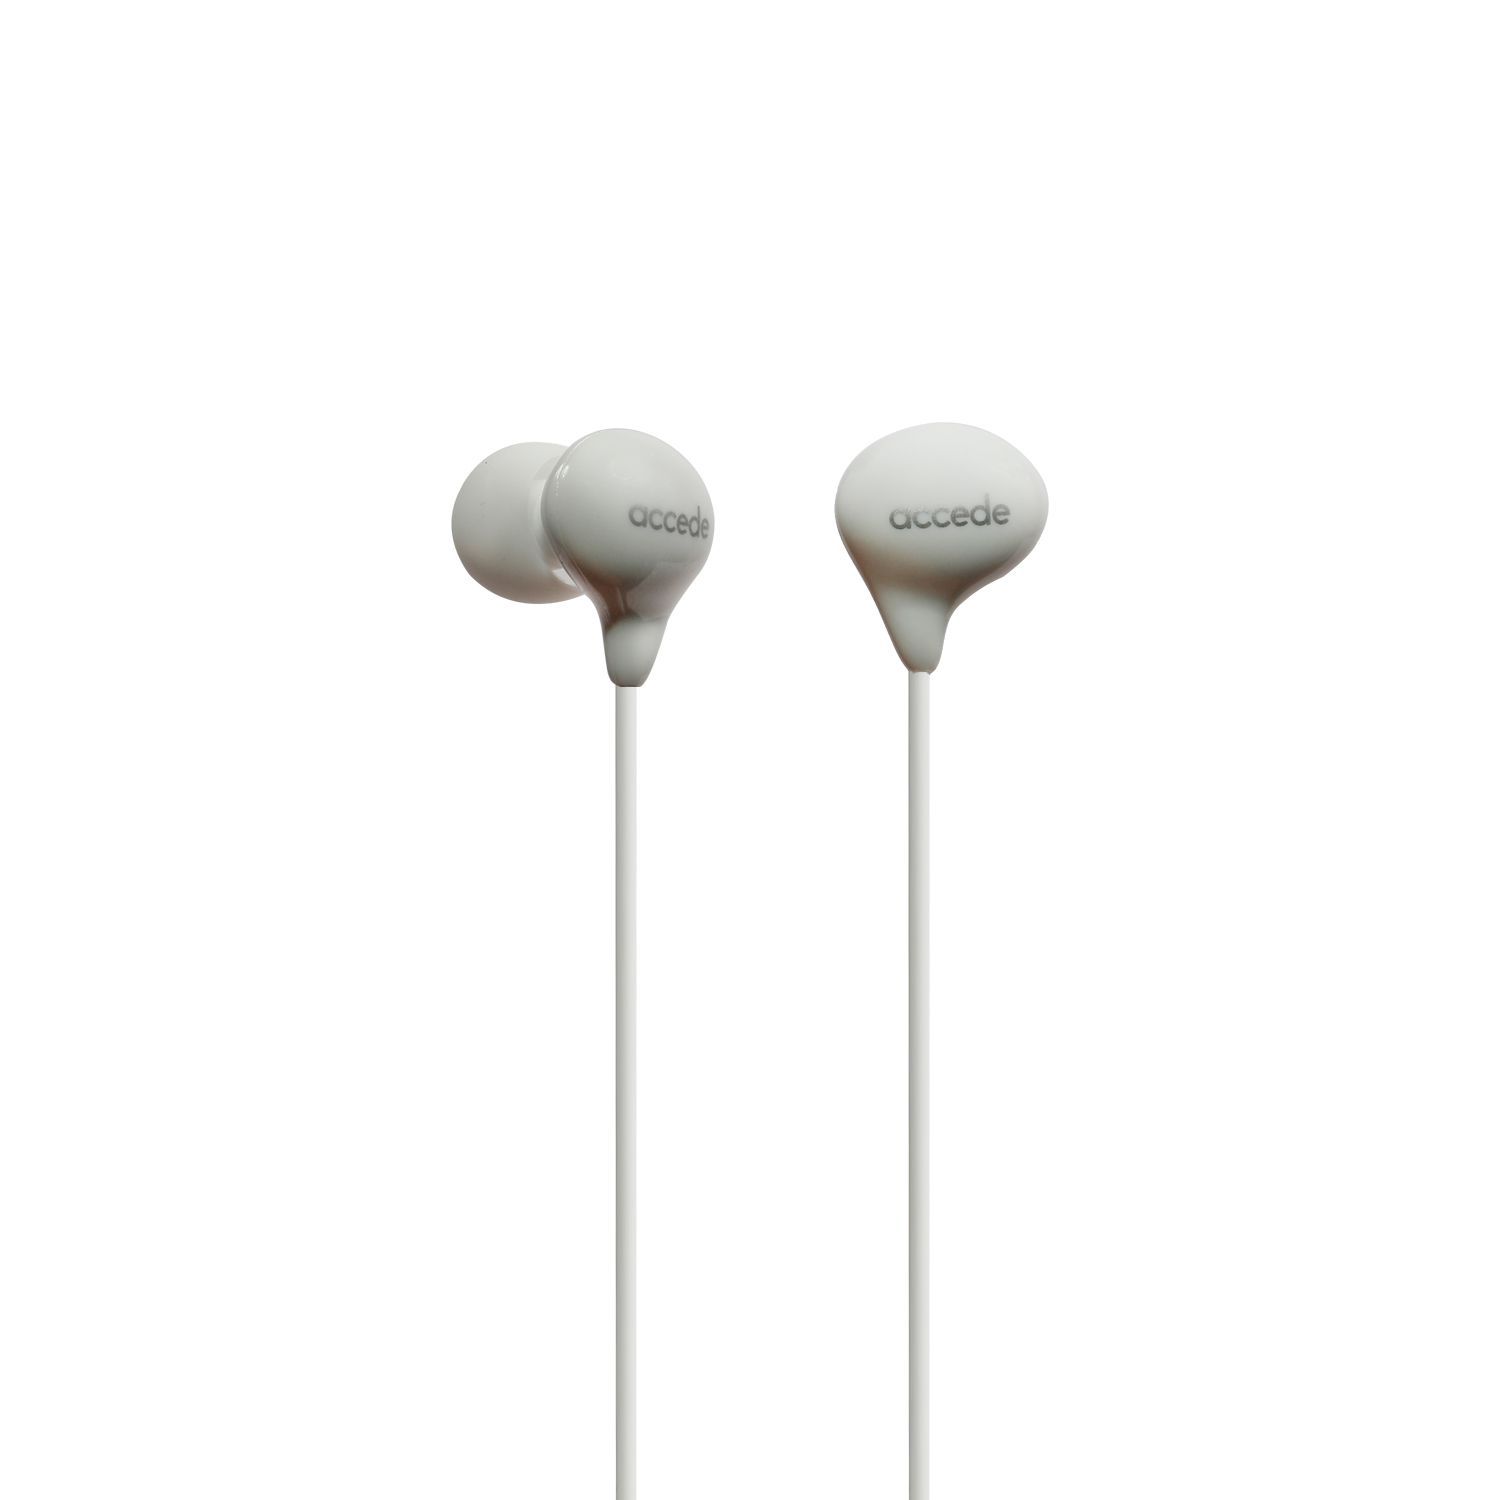 Accede Candy In Ear Wired Earphones With Mic - Buy Accede Candy In Ear ...